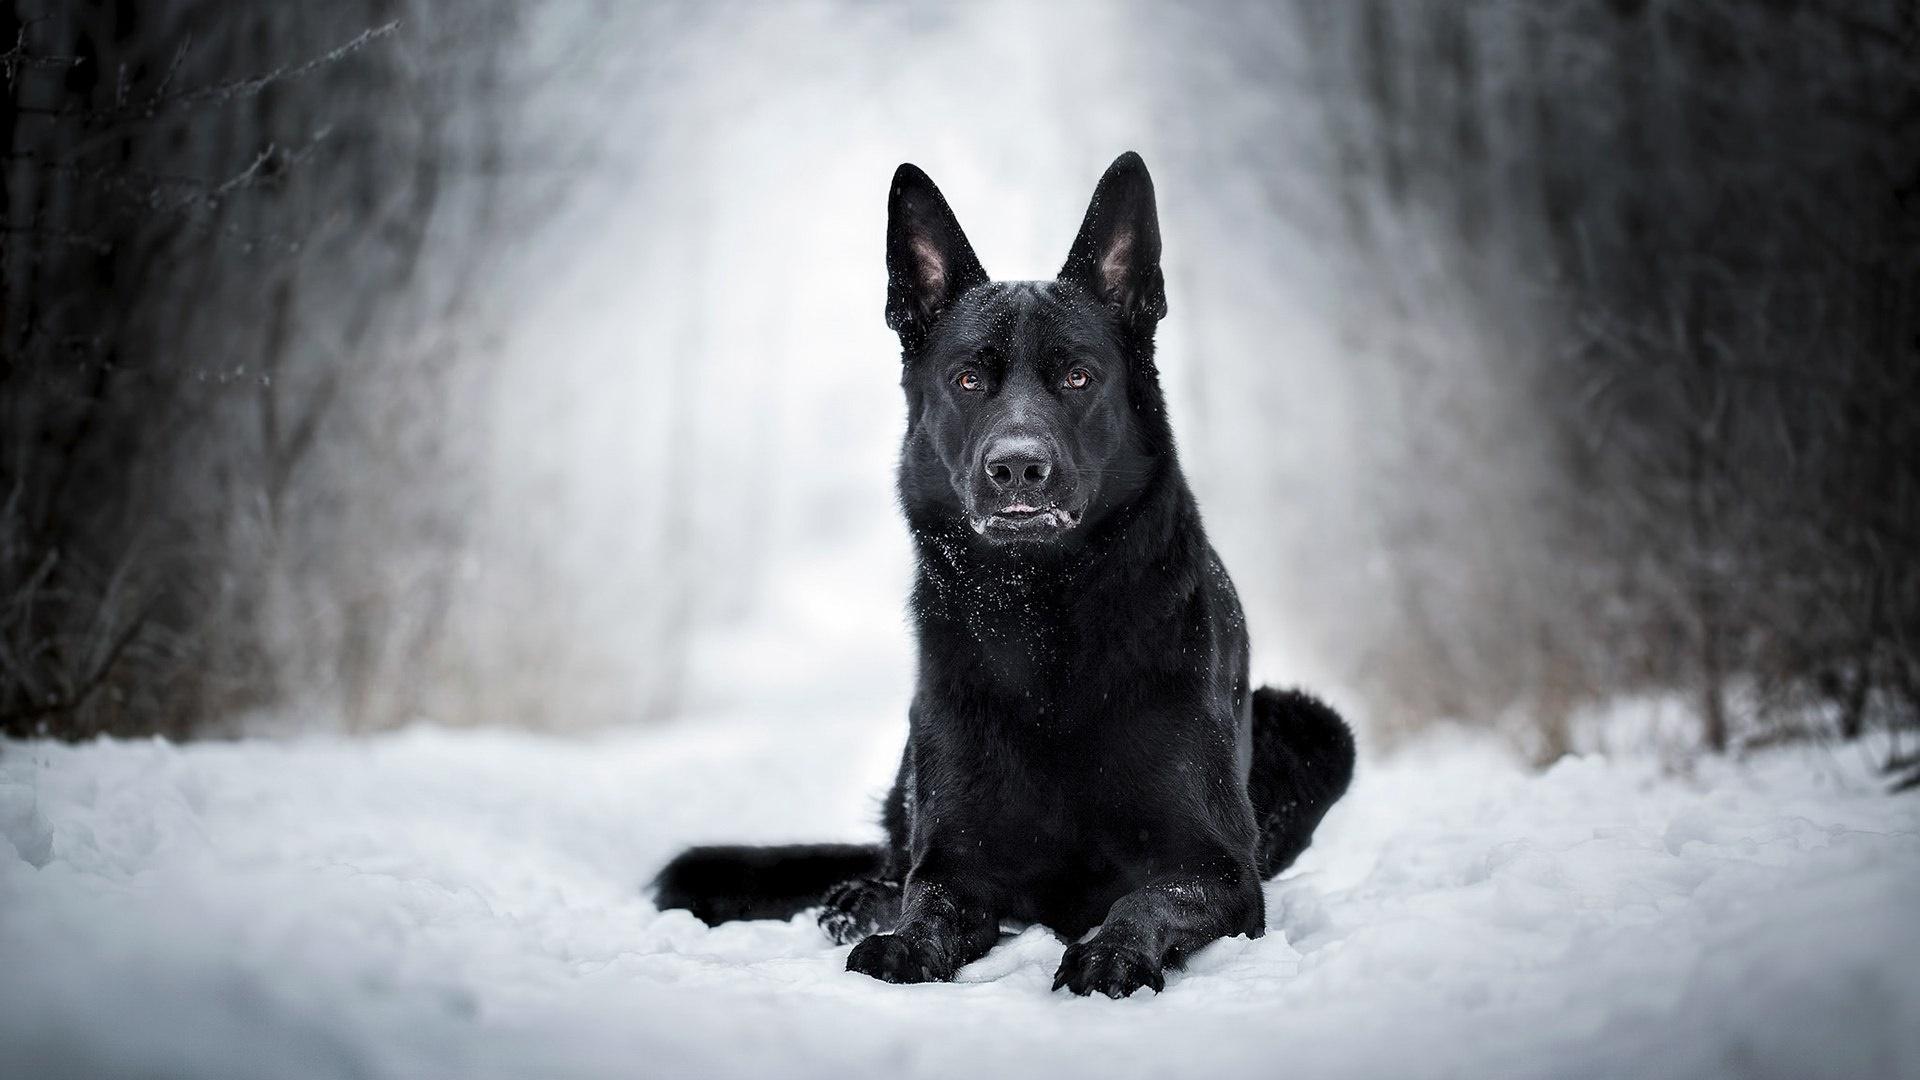 Black Dog in the Snow HD Wallpaper. Background Image